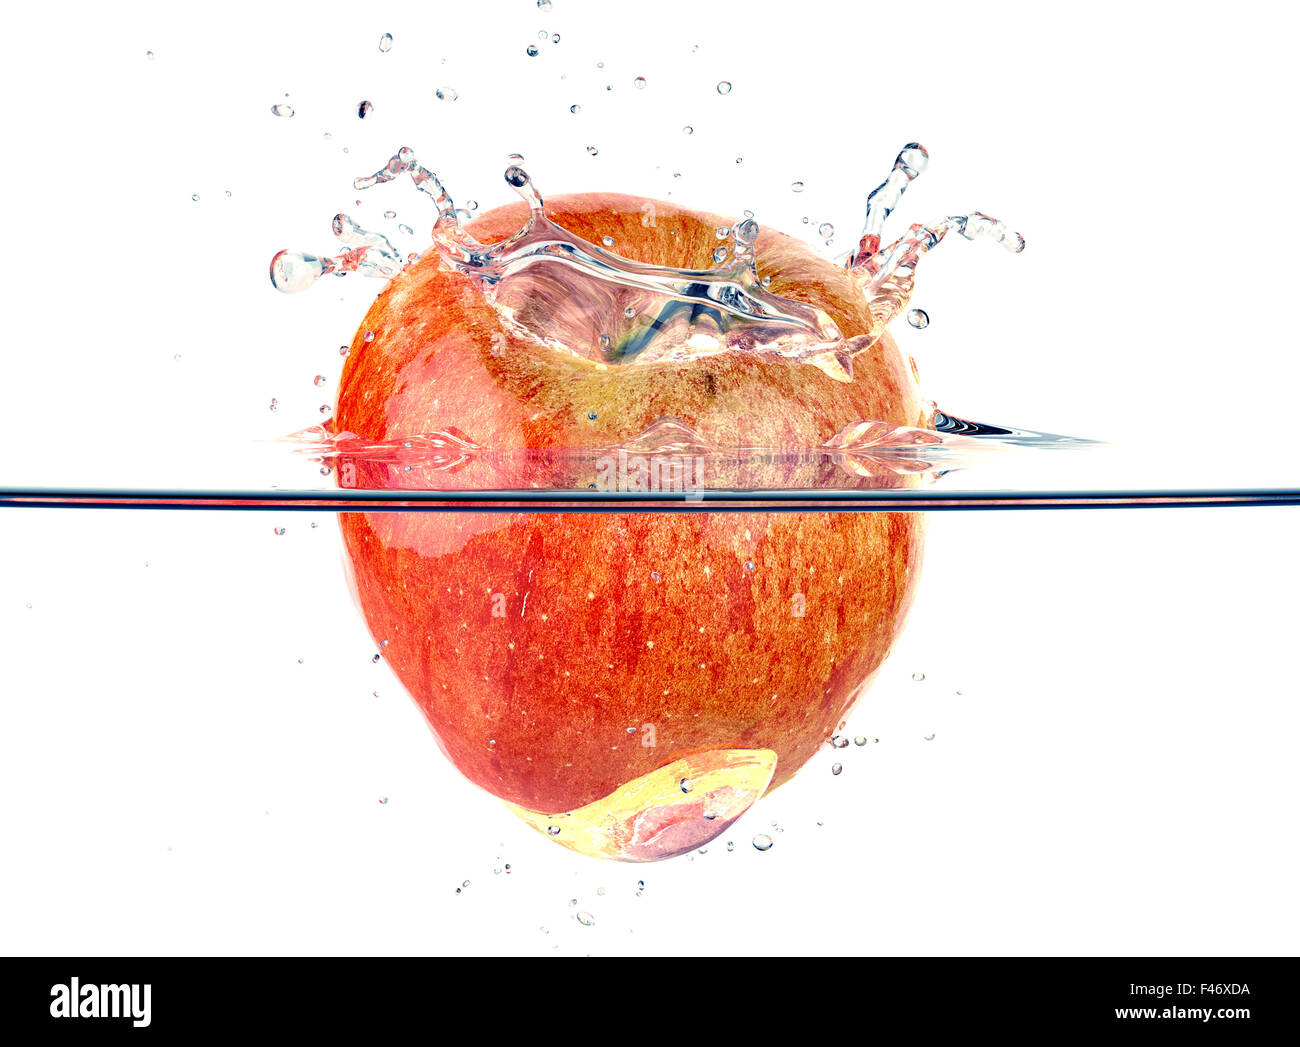 red apple faling and splashing into clear water Stock Photo